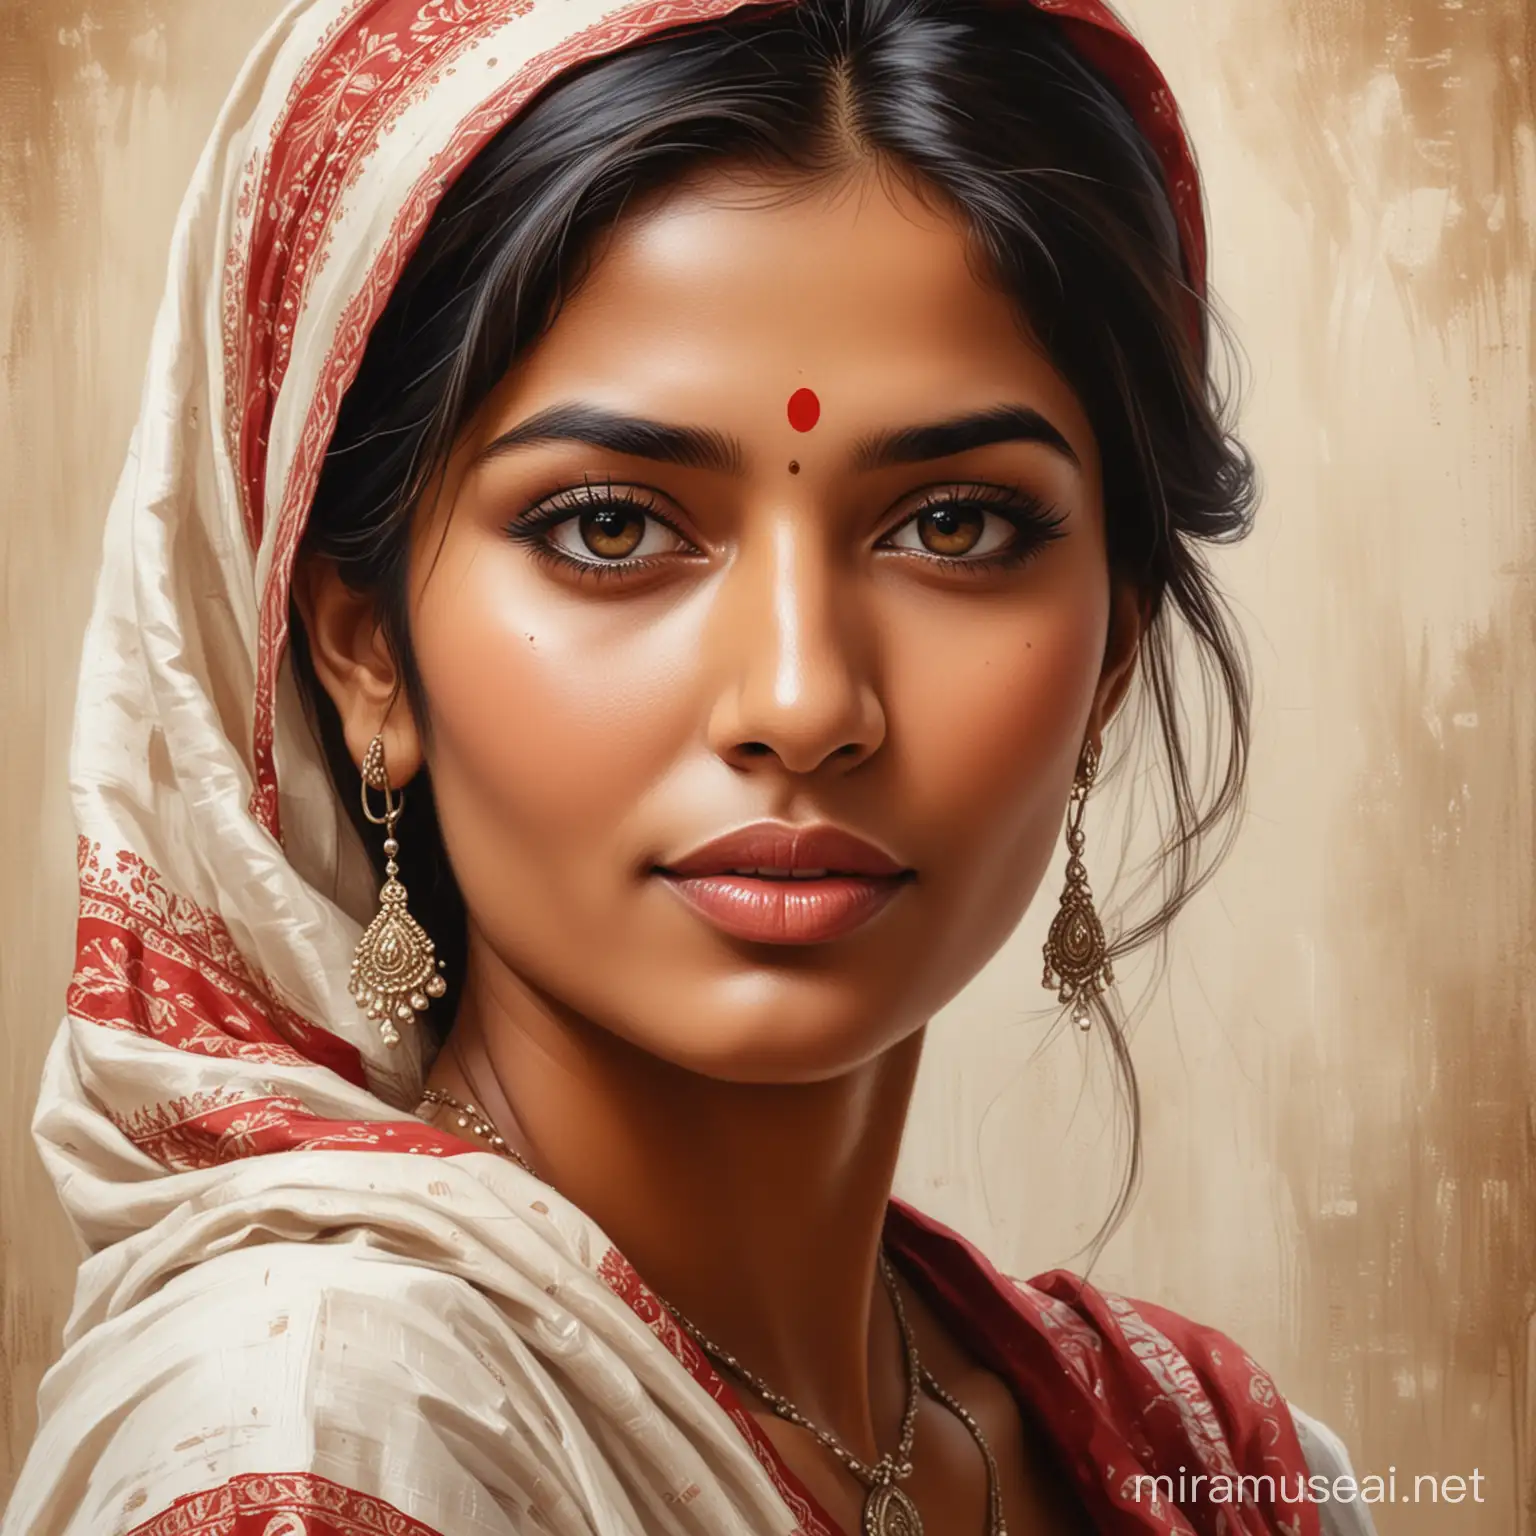 Exquisite Indian Woman Portrait with Traditional Attire